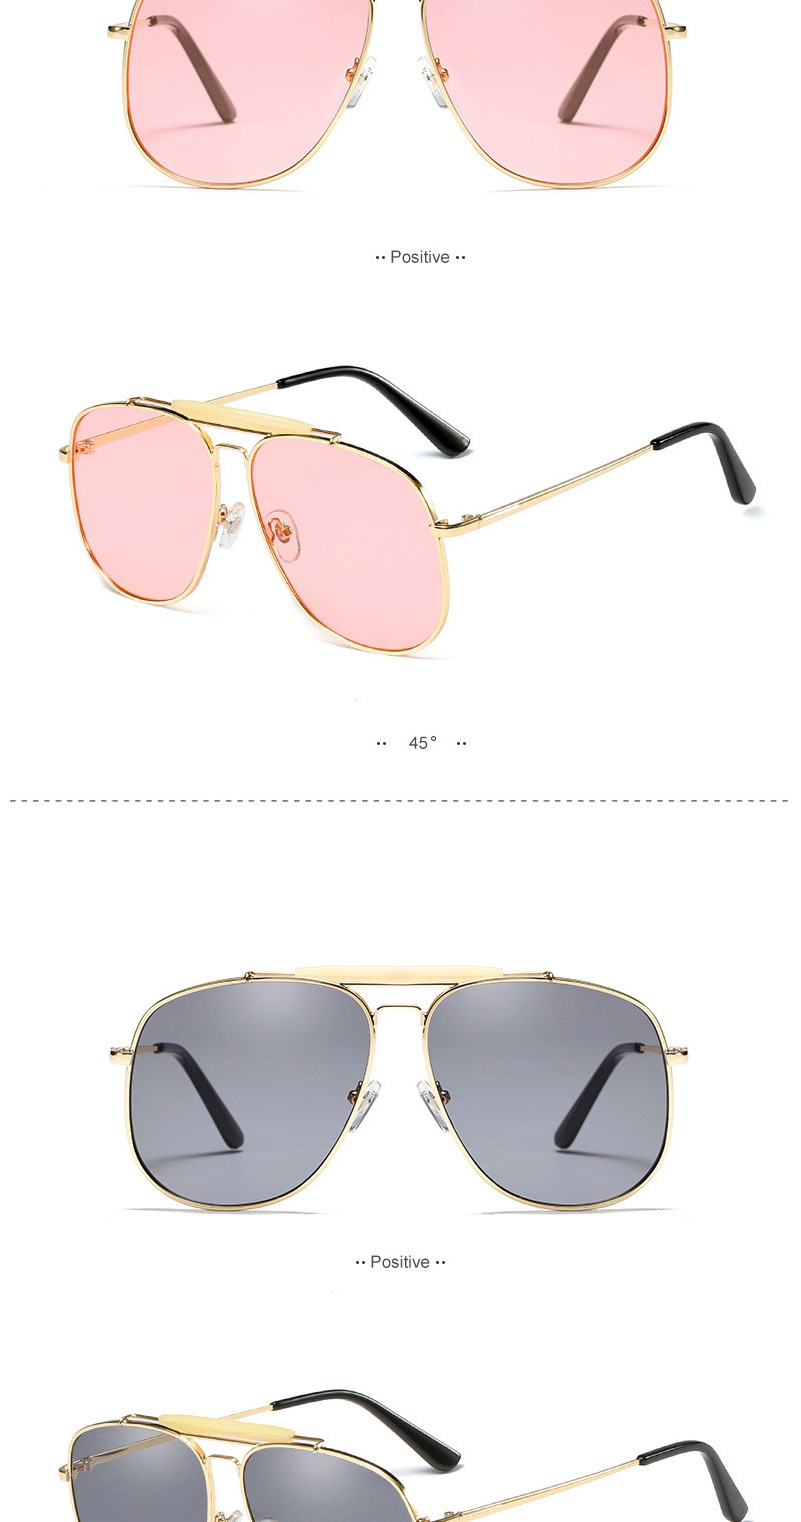 Fashion C2 Gold/champagne Chips Candy-colored Metal Sunglasses,Women Sunglasses